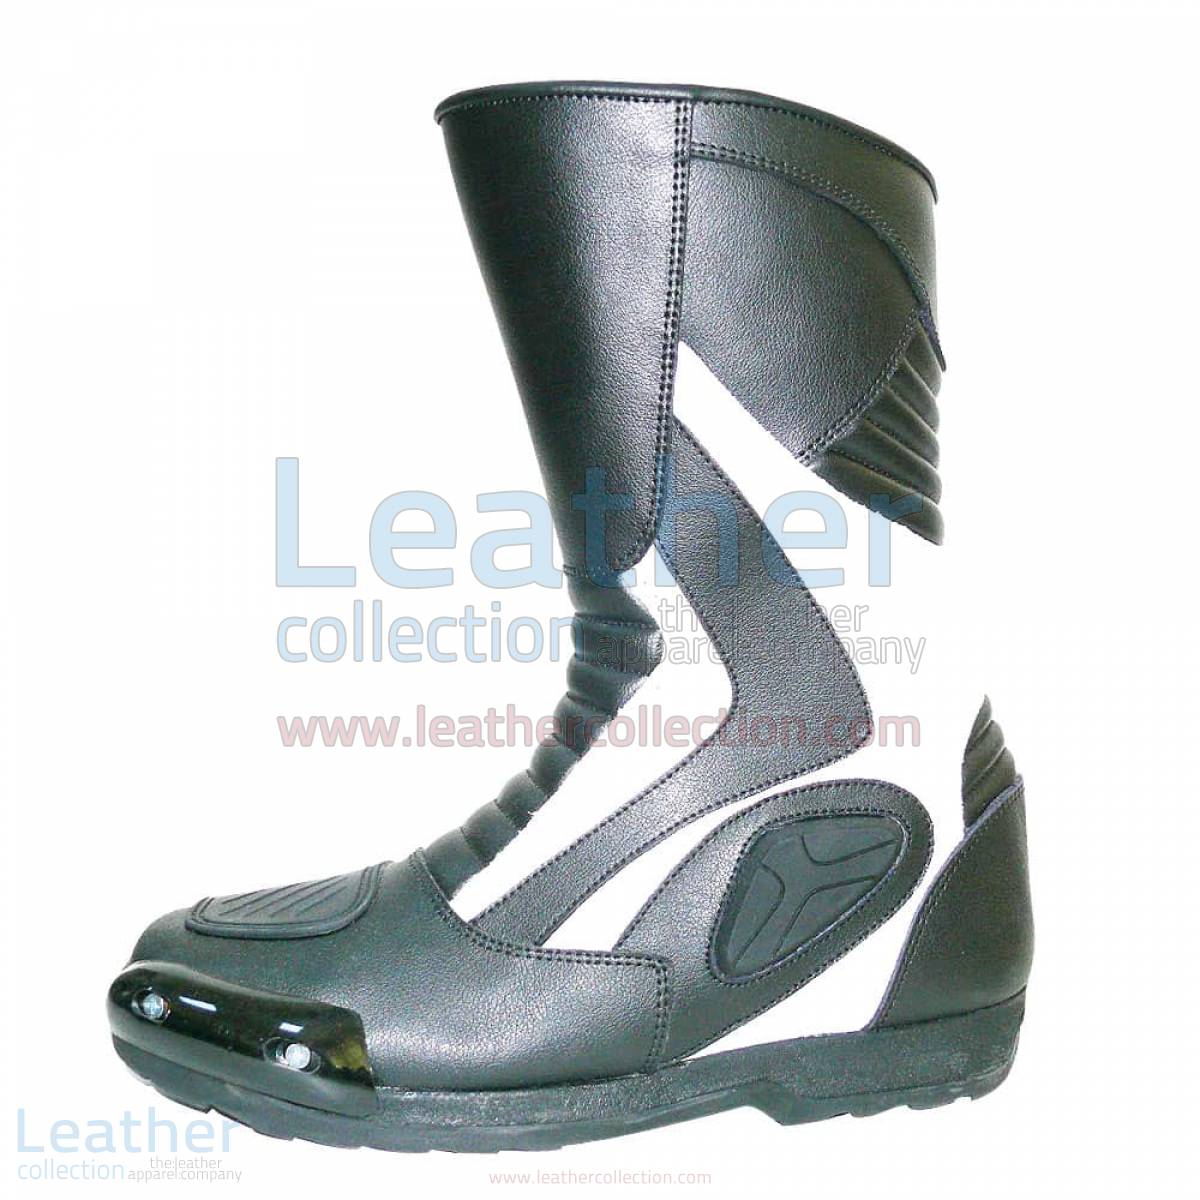 Heritage White Leather Racing Boots